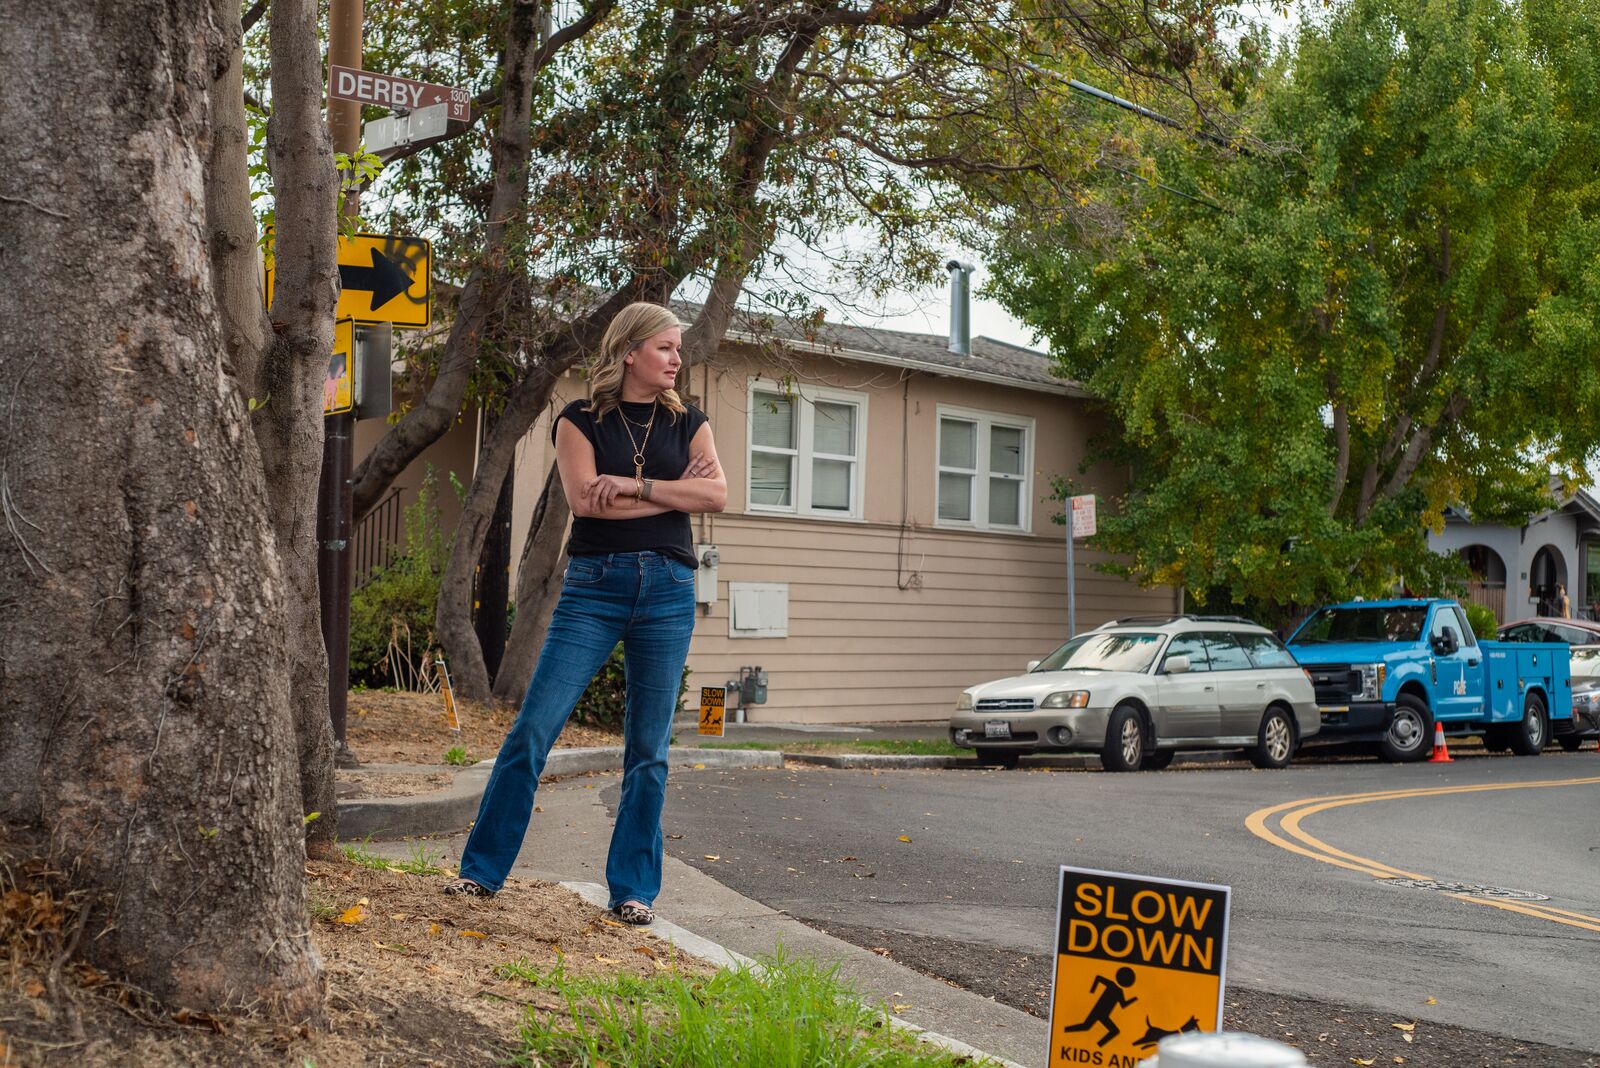 A hit-and-run driver nearly killed her son on Halloween. Now this Berkeley mother is demanding safer streets